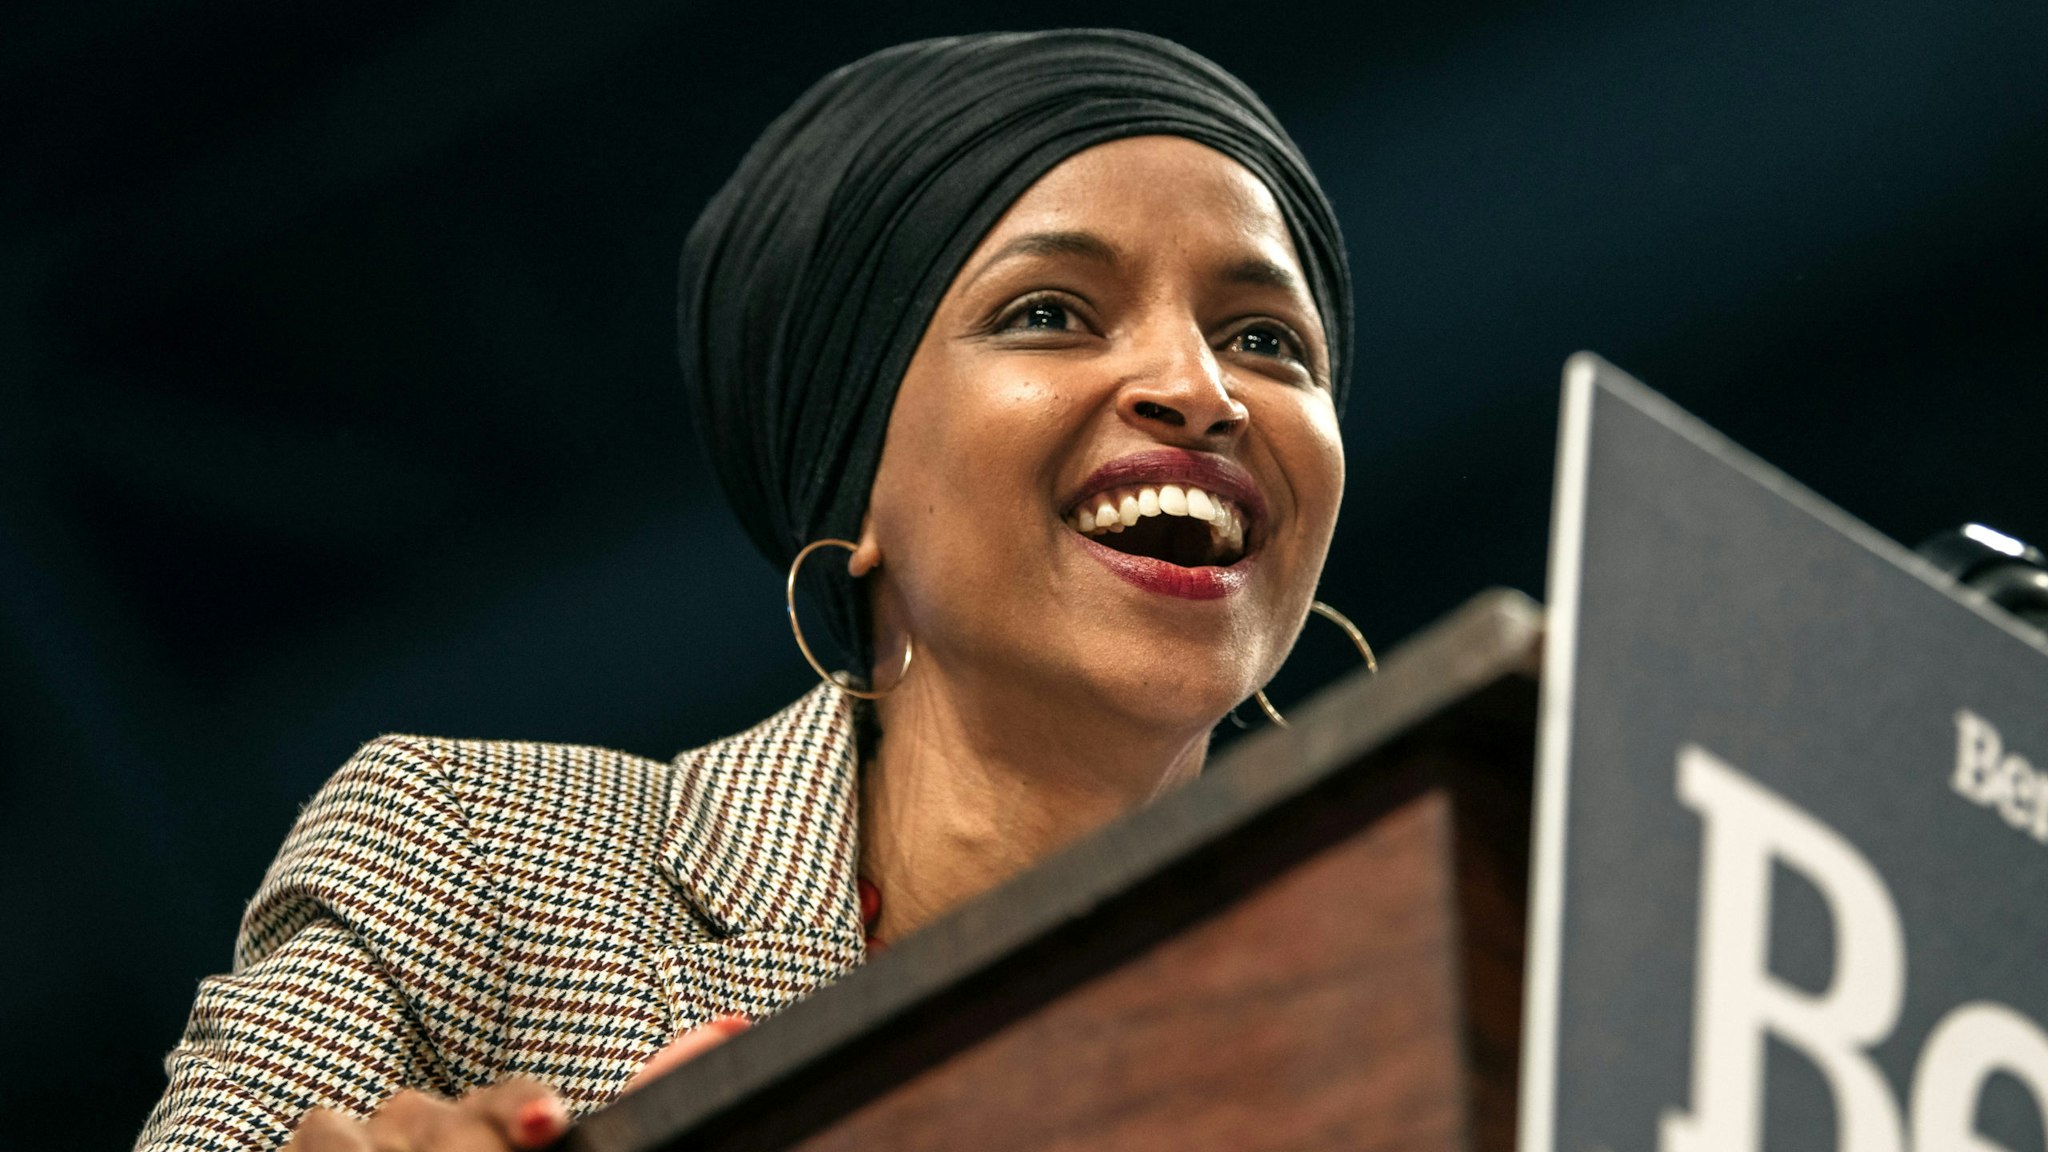 MINNEAPOLIS, MN - NOVEMBER 03: Representative Ilhan Omar (D-MN) speaks at a campaign rally for Senator (I-VT) and presidential candidate Bernie Sanders at the University of Minnesotas Williams Arena on November, 3, 2019 in Minneapolis, Minnesota. Before introducing him, Rep. Omar praised Sanders for his support of unions, comprehensive immigration reform, and support for refugees.